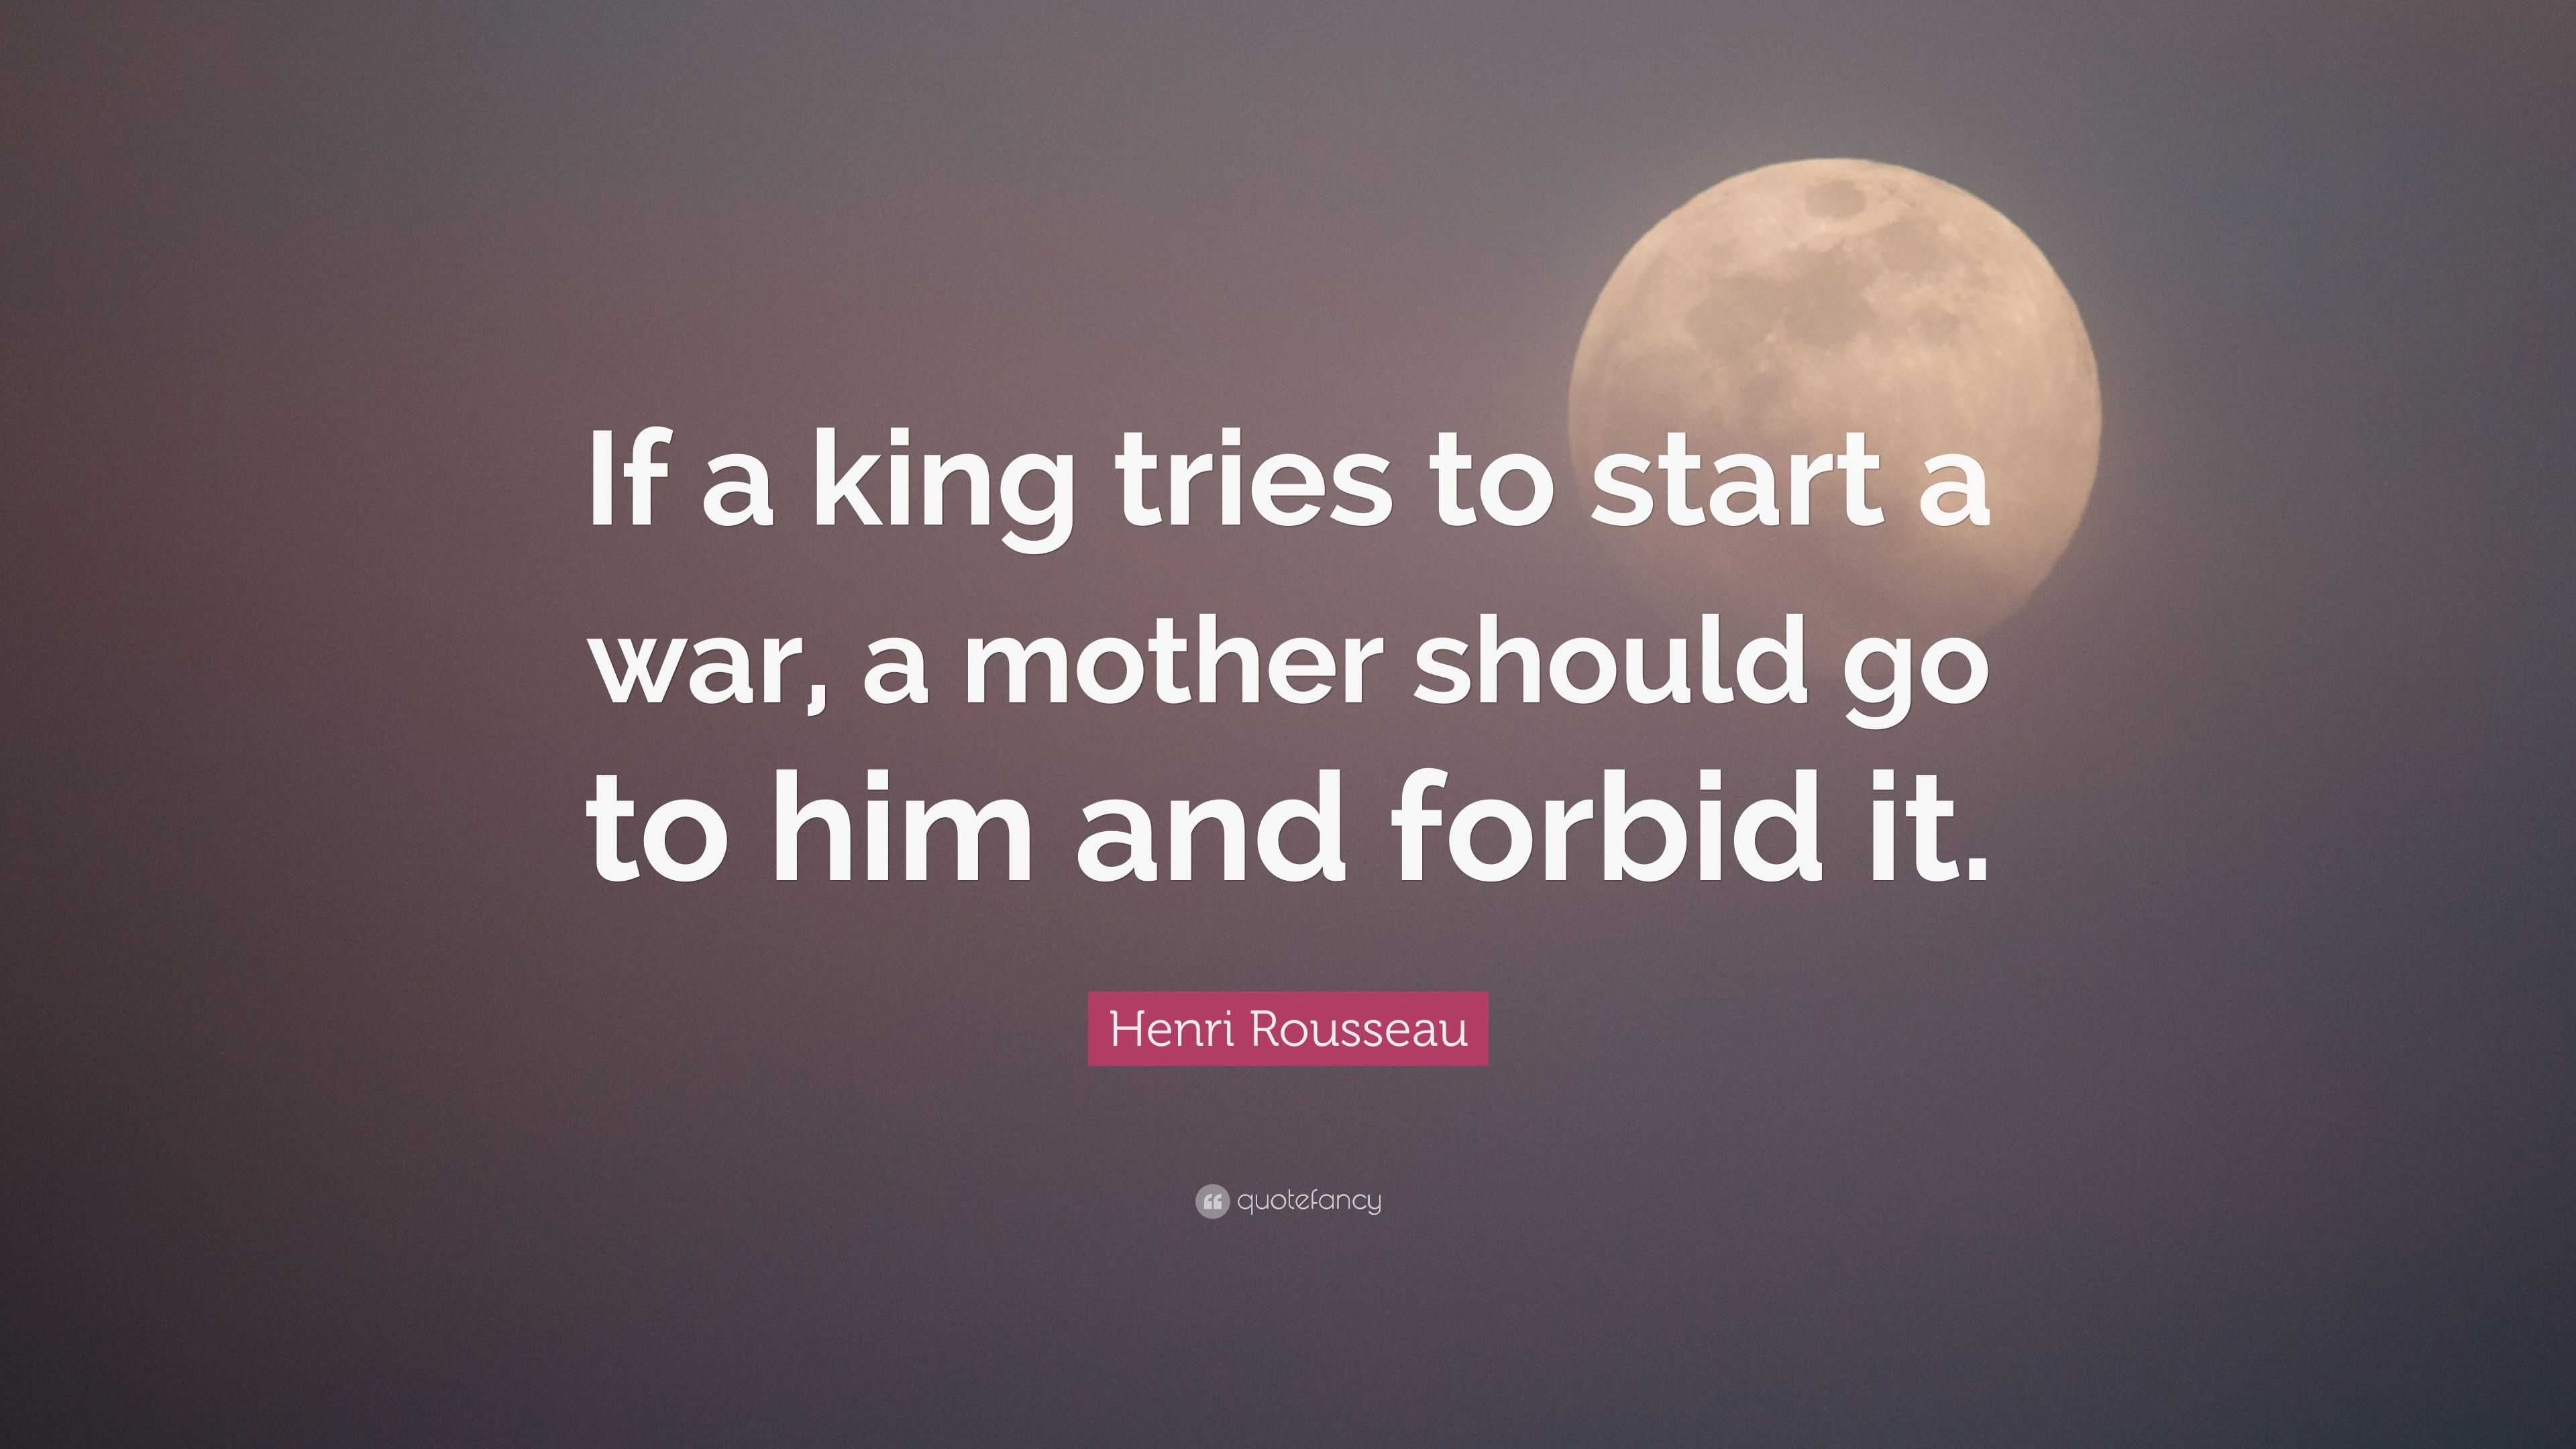 Henri Rousseau Quote: “If a king tries to start a war, a mother should ...